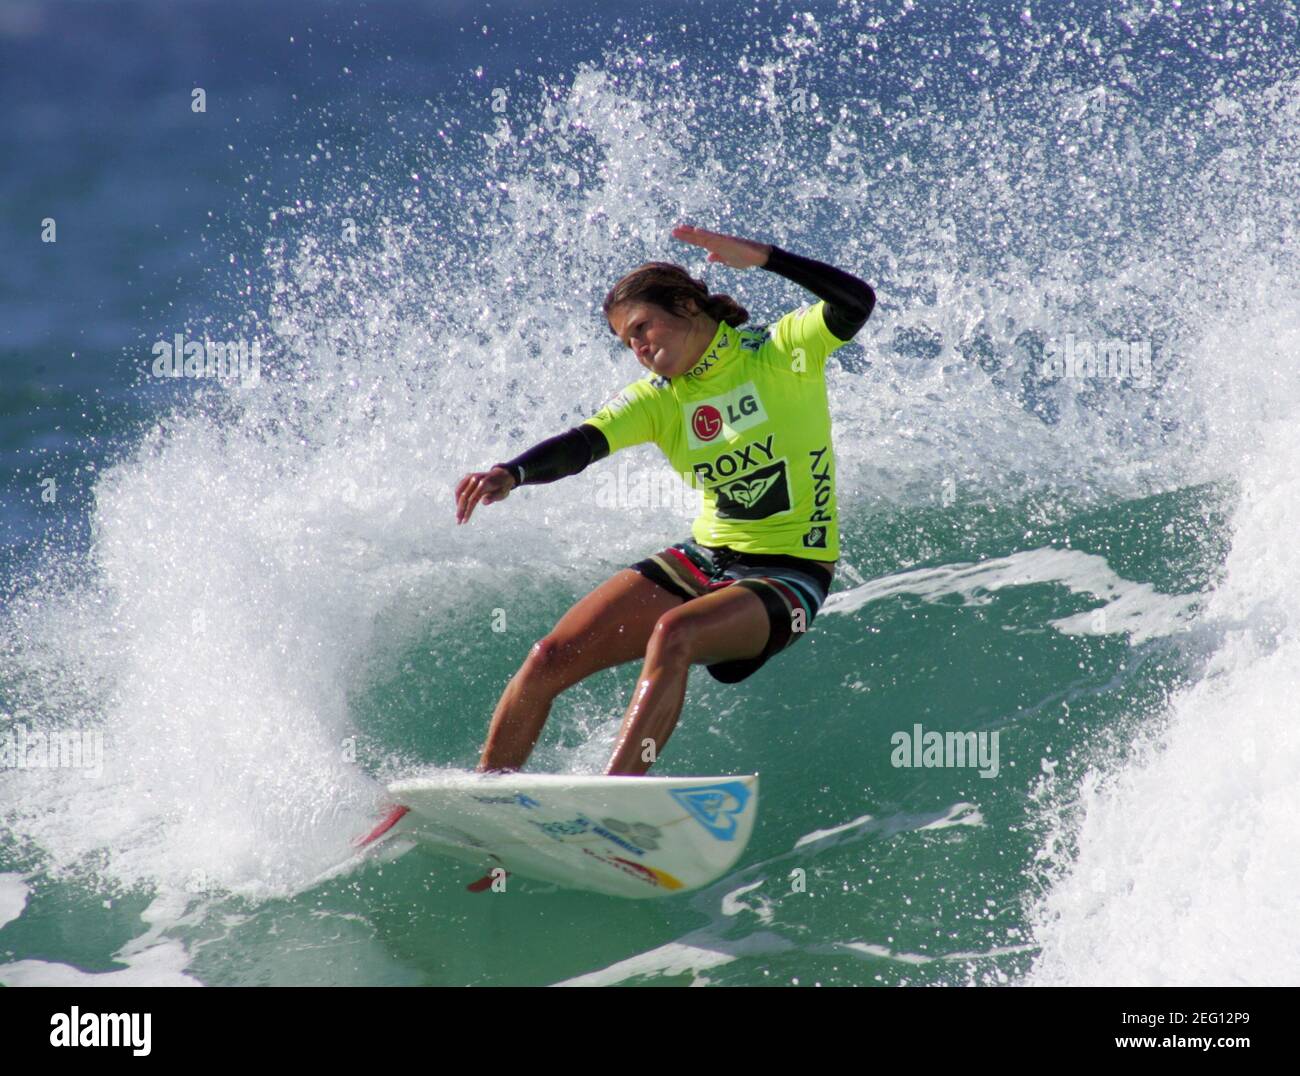 Surfing Roxy Pro Snapper Rocks Gold Coast Australia 1 3 08 Peru S Sofia Mulanovich In Action During The Final Mandatory Credit Action Images Jason O Brien Stock Photo Alamy